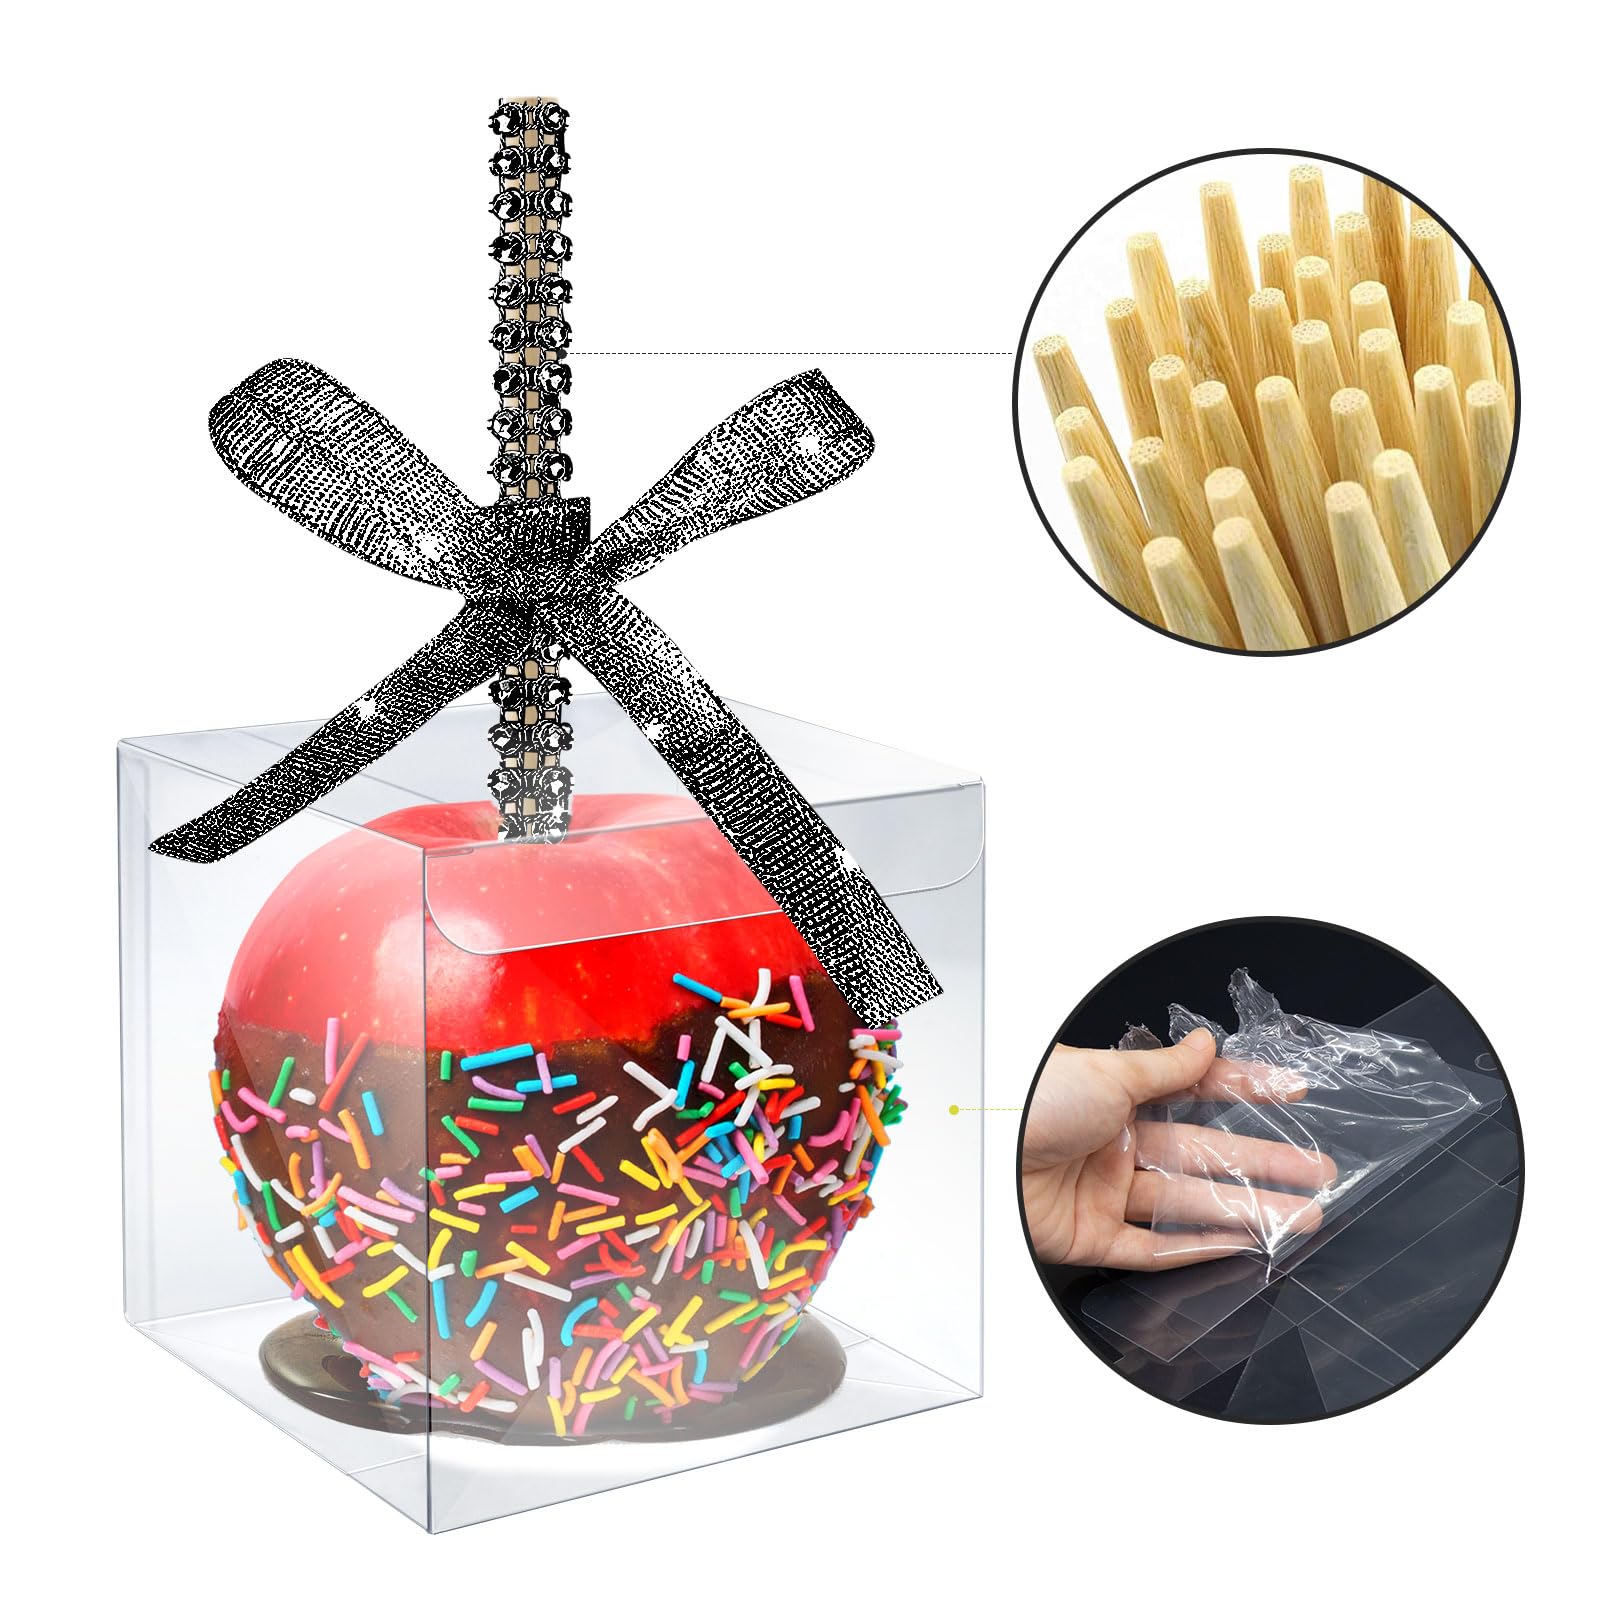 MGWOTH Candy Apple Boxes with Bling Stick Hole Set,20 Pack Caramel Apple Wrapping Kit with Clear Containers & Rhinestone Bamboo Skewers & Glitter Ribbons,Top for Cake Pop Chocolate Treat Christmas